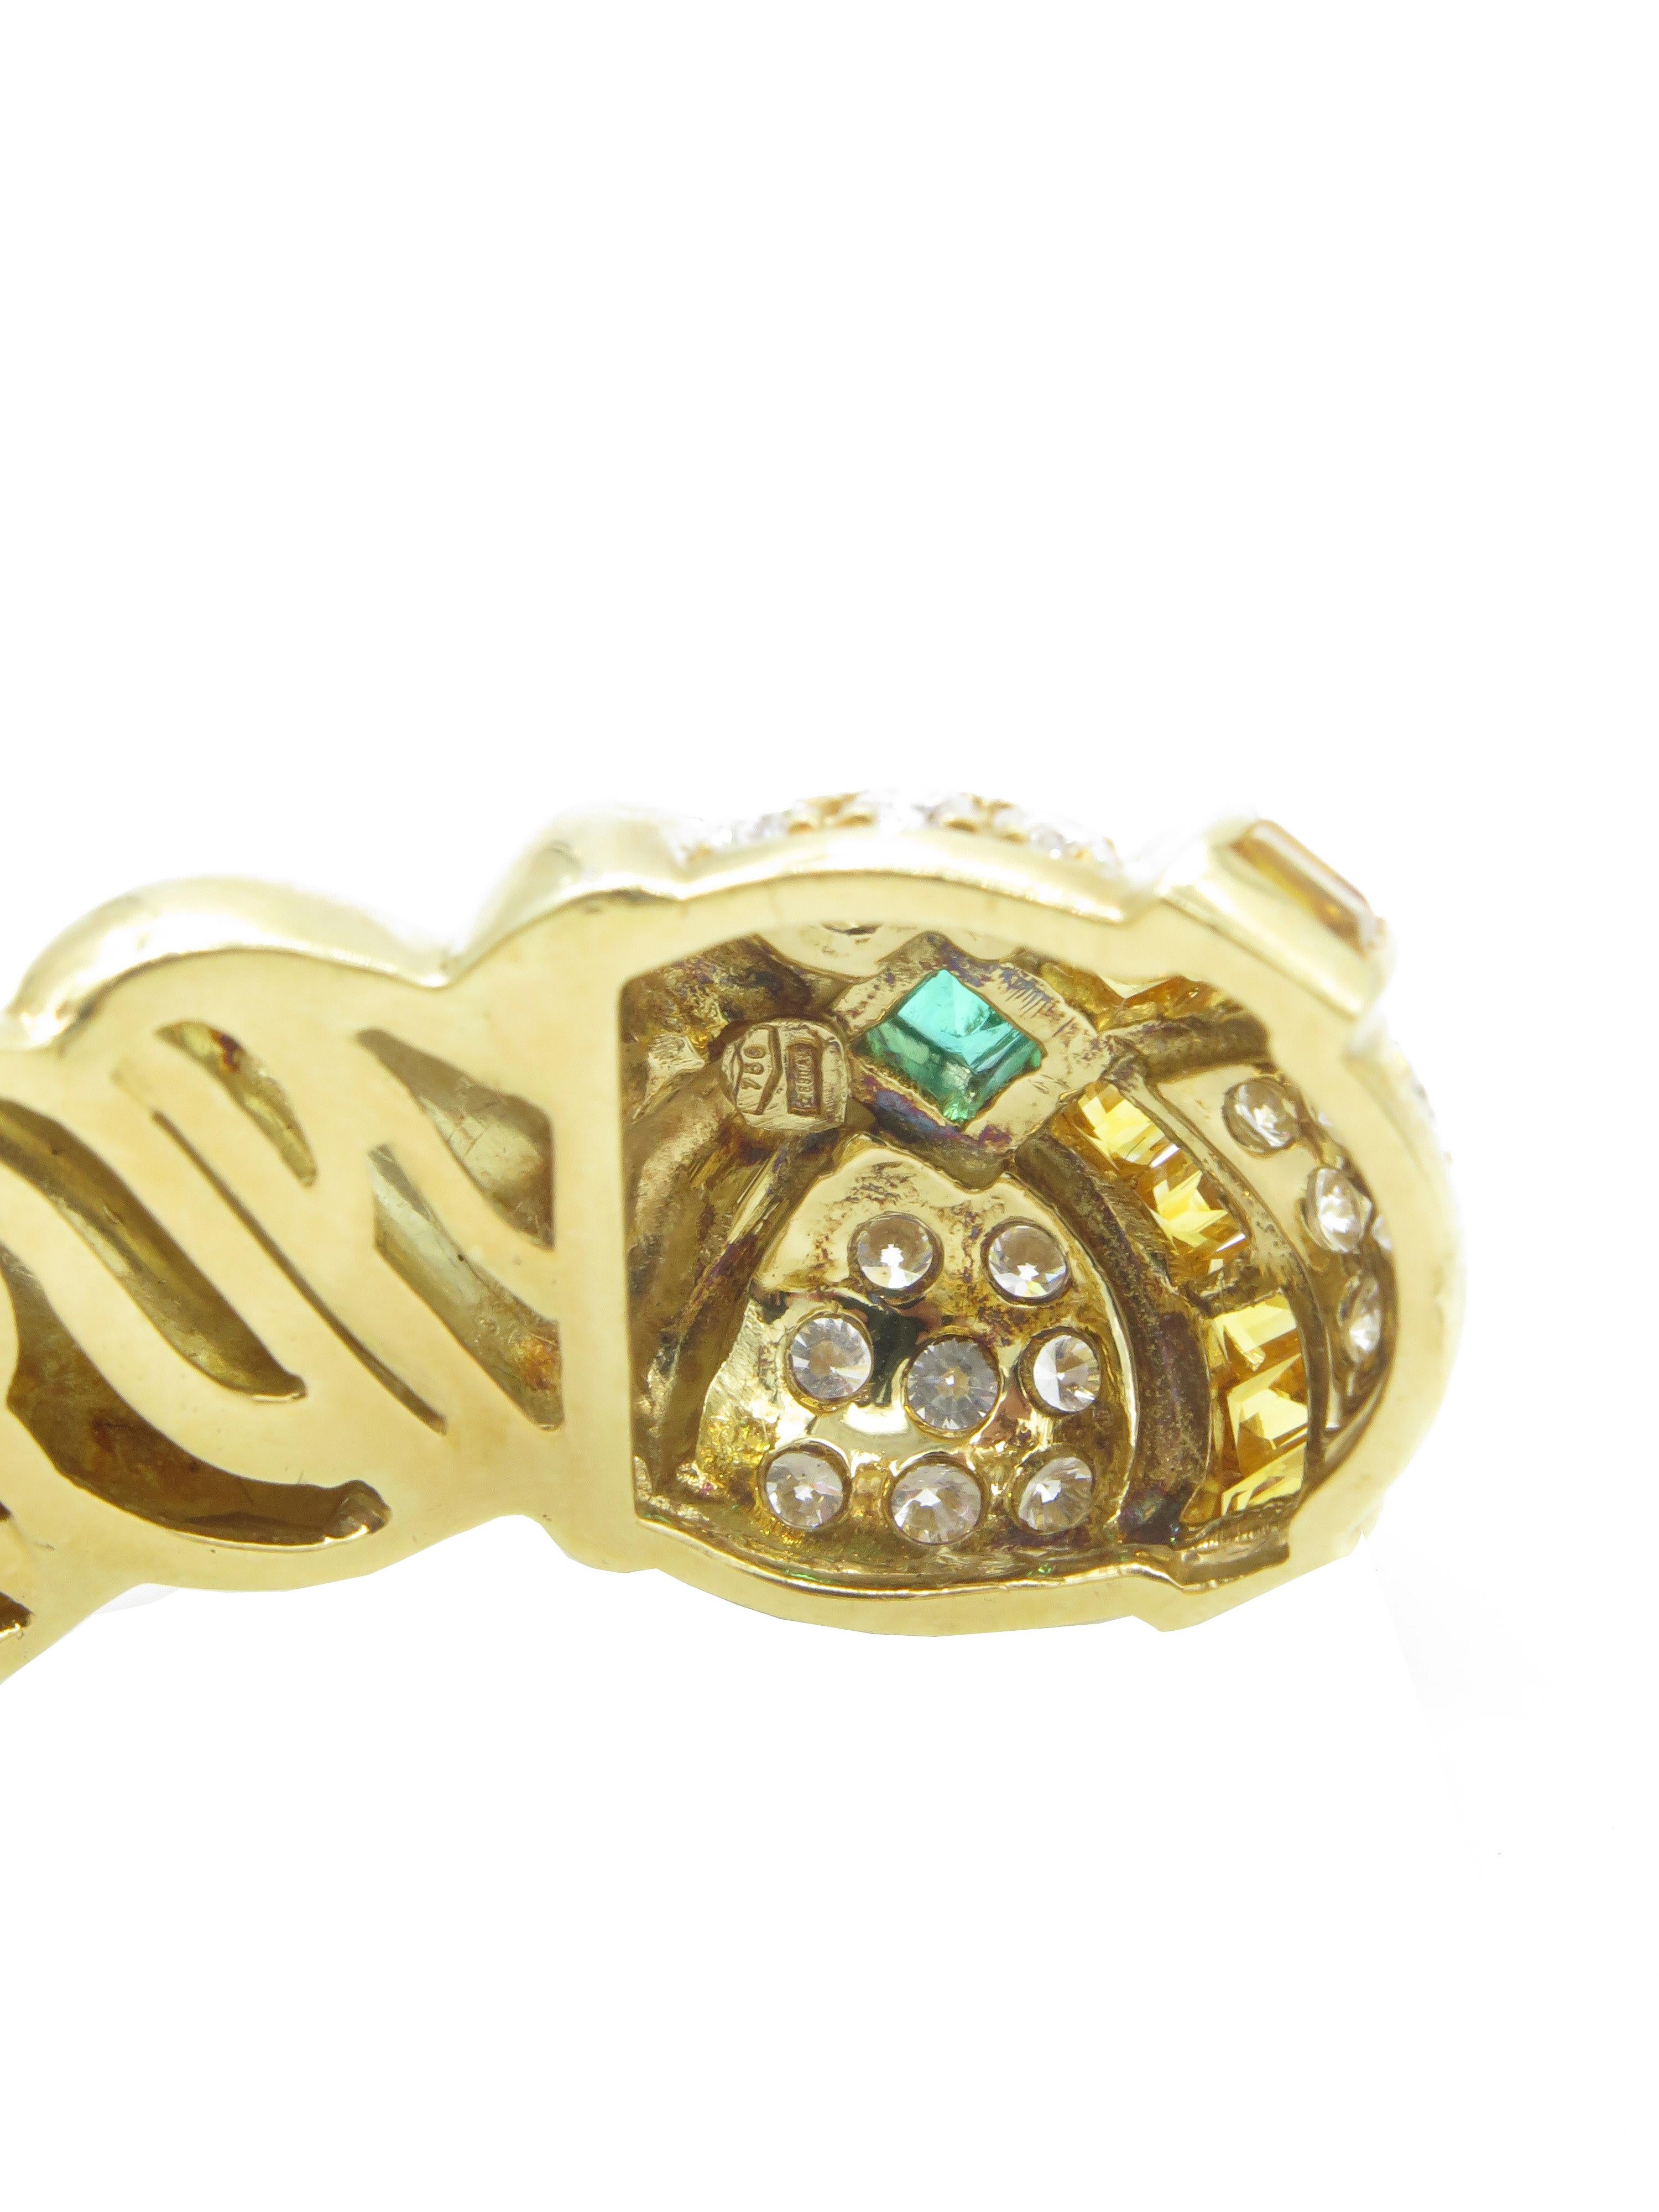 18 Karat Yellow Gold Hinged Bangle with Diamonds, Emeralds and Citrine For Sale 6